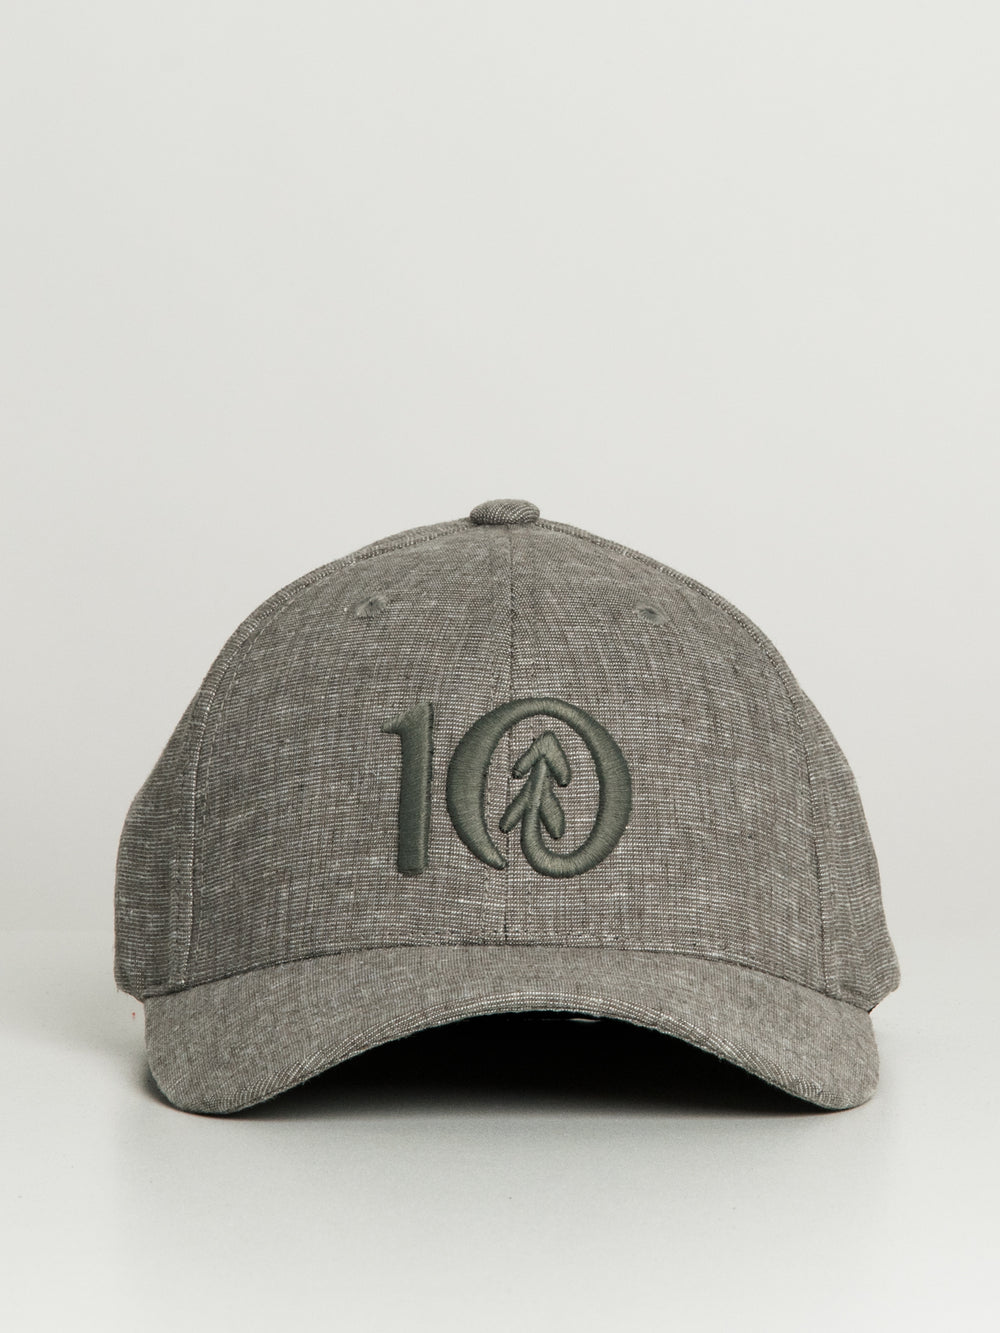 TENTREE LOGO HEMP THICKET STRETCH FIT HAT - CLEARANCE